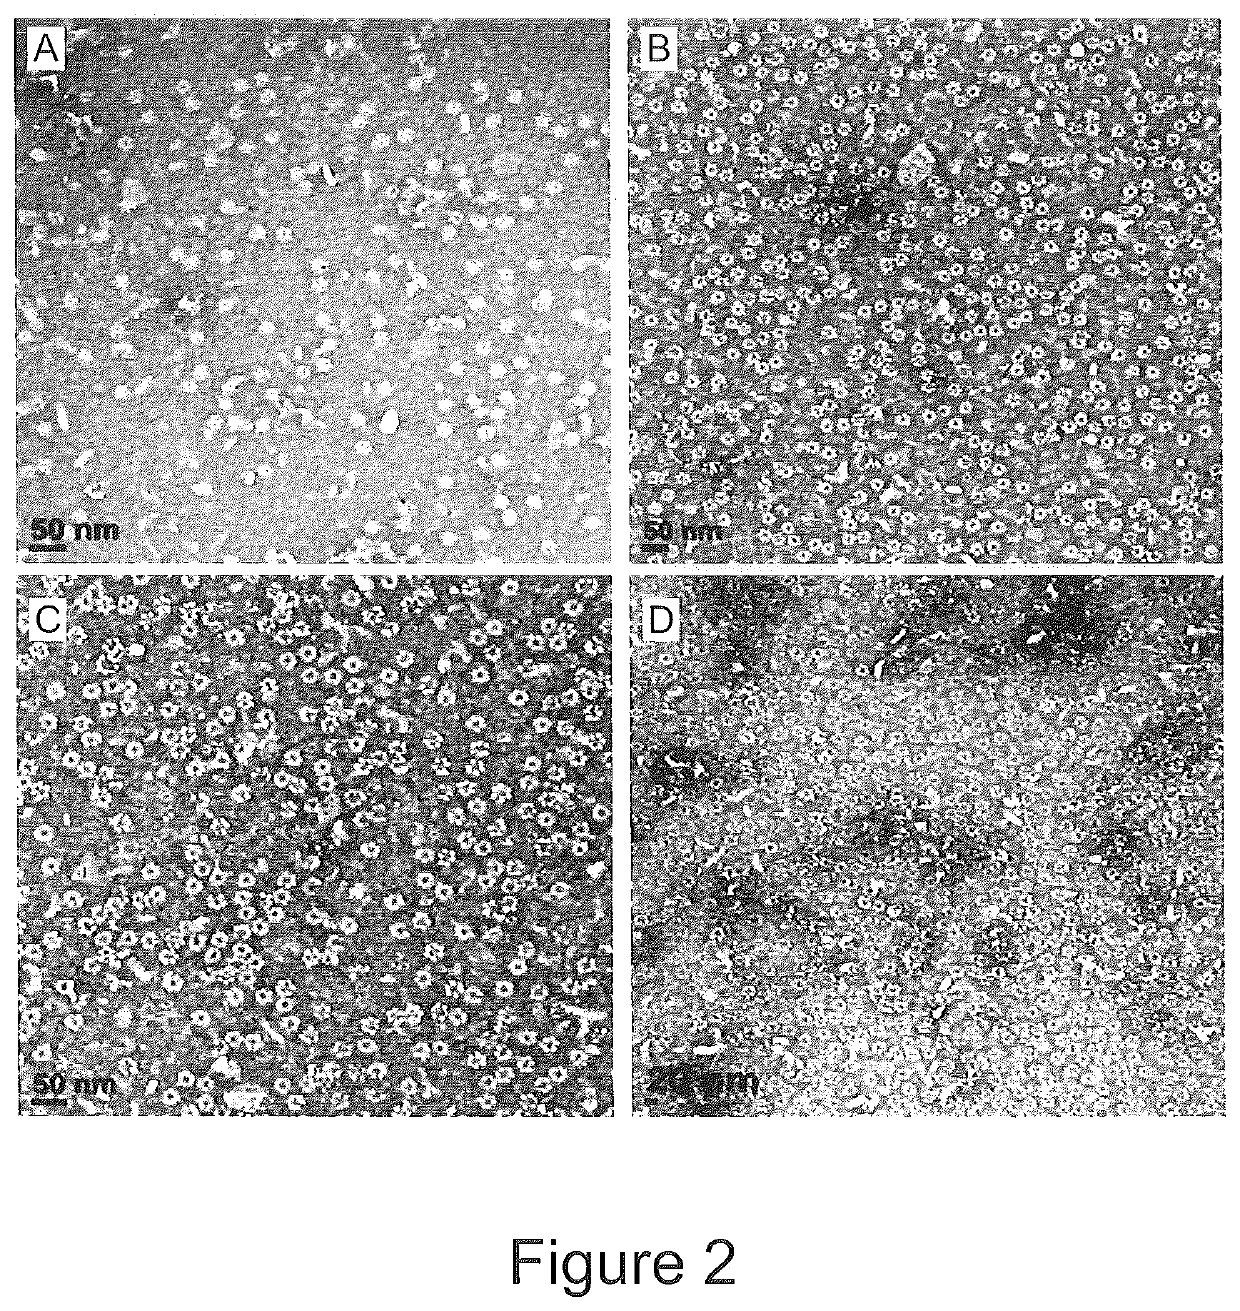 Targeting of melanocytes for delivering therapeutic or diagnostic agents using protein nanocages